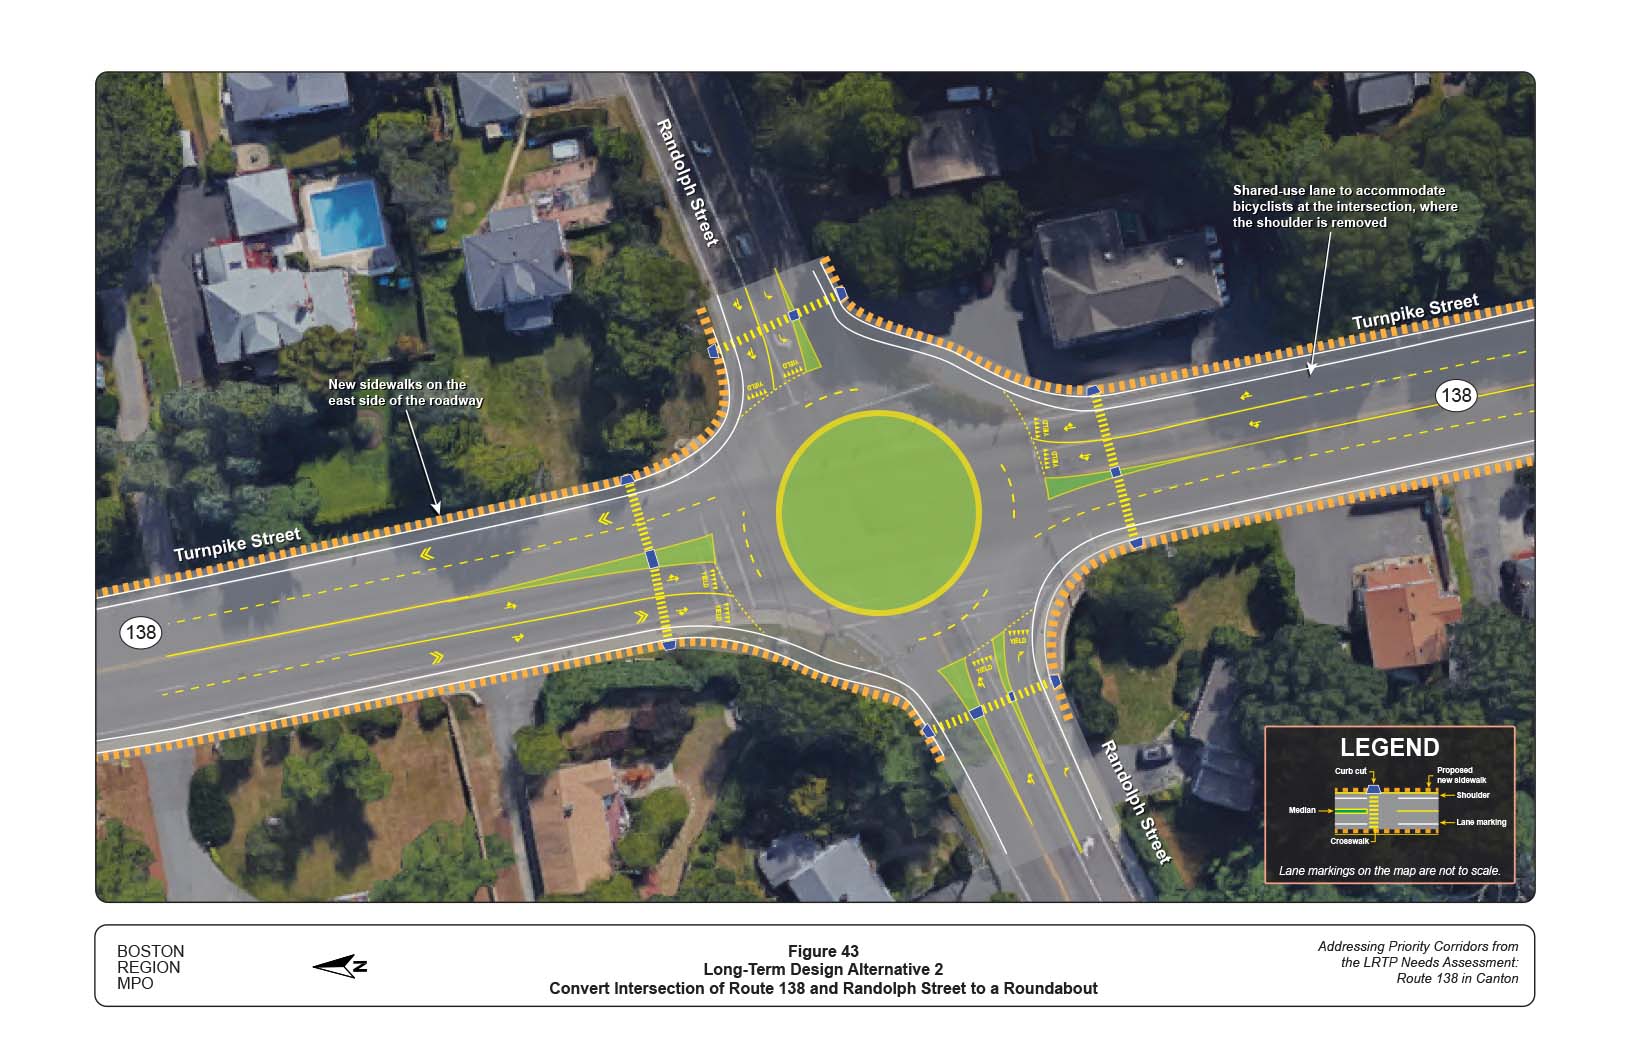 Figure 43 is map of the intersection of Route 138 and Randolph Street with overlays showing an alternative for redesigning the intersection into a roundabout.